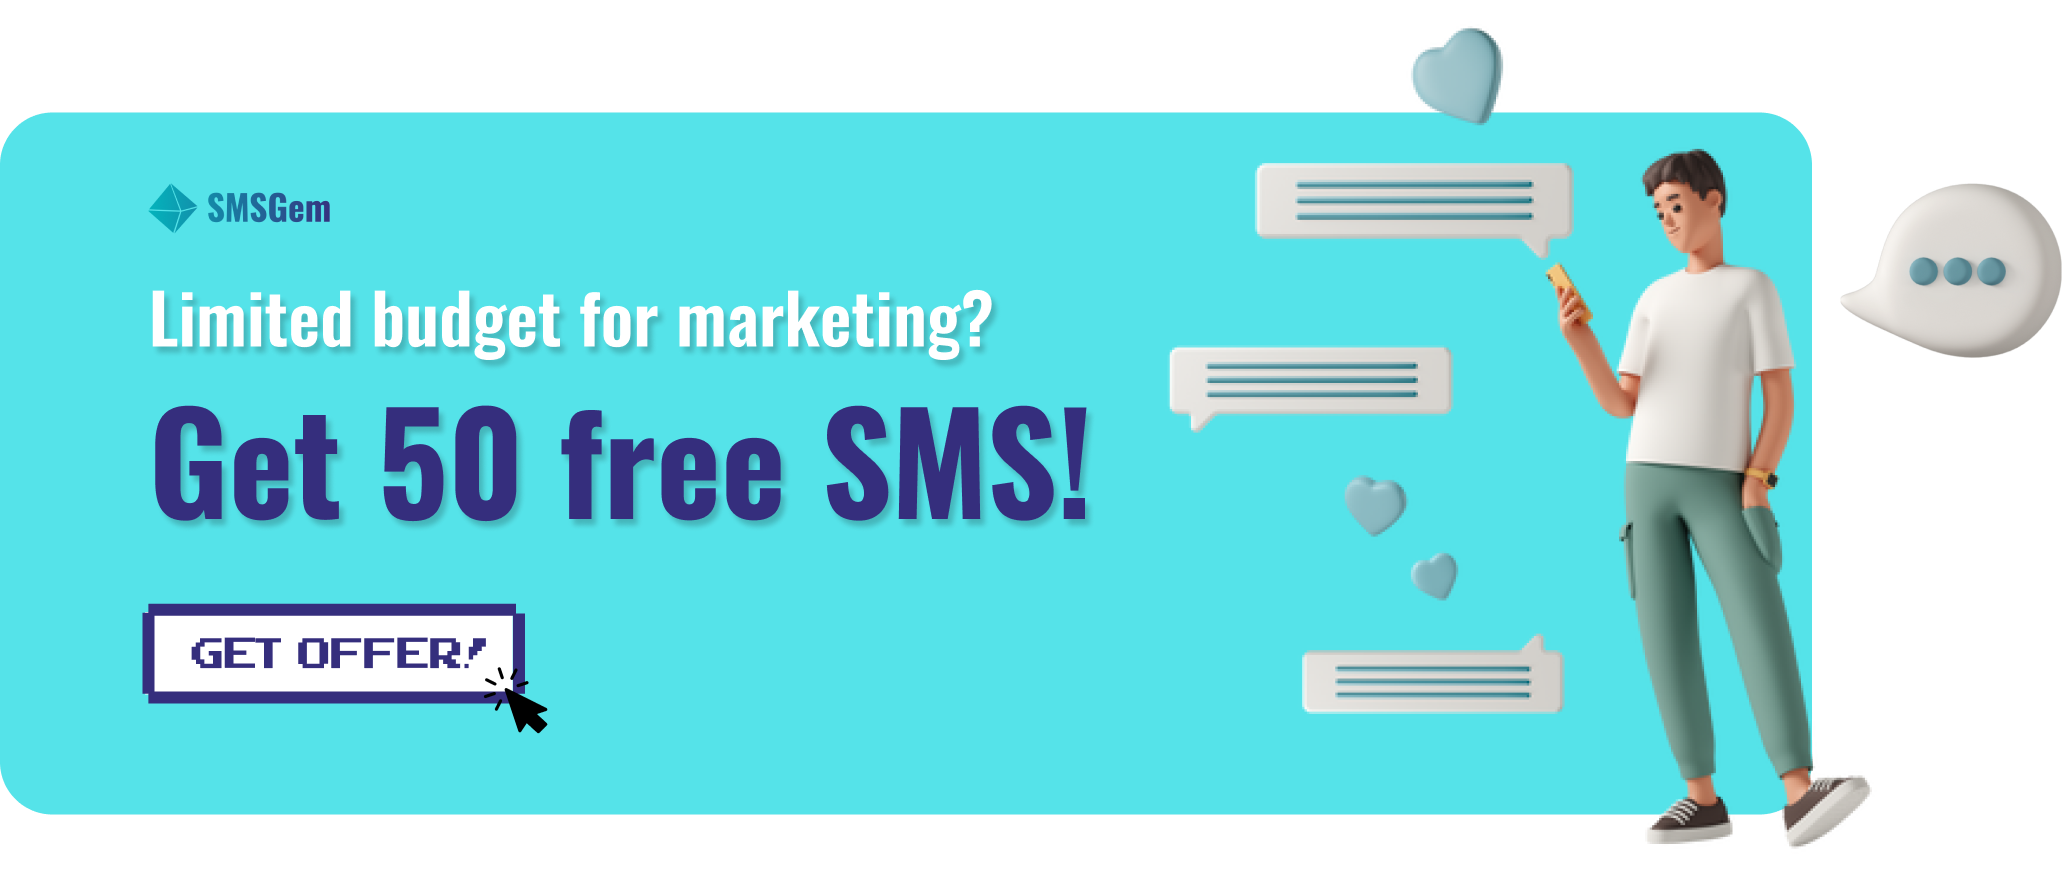 Click to get 50 Free SMS